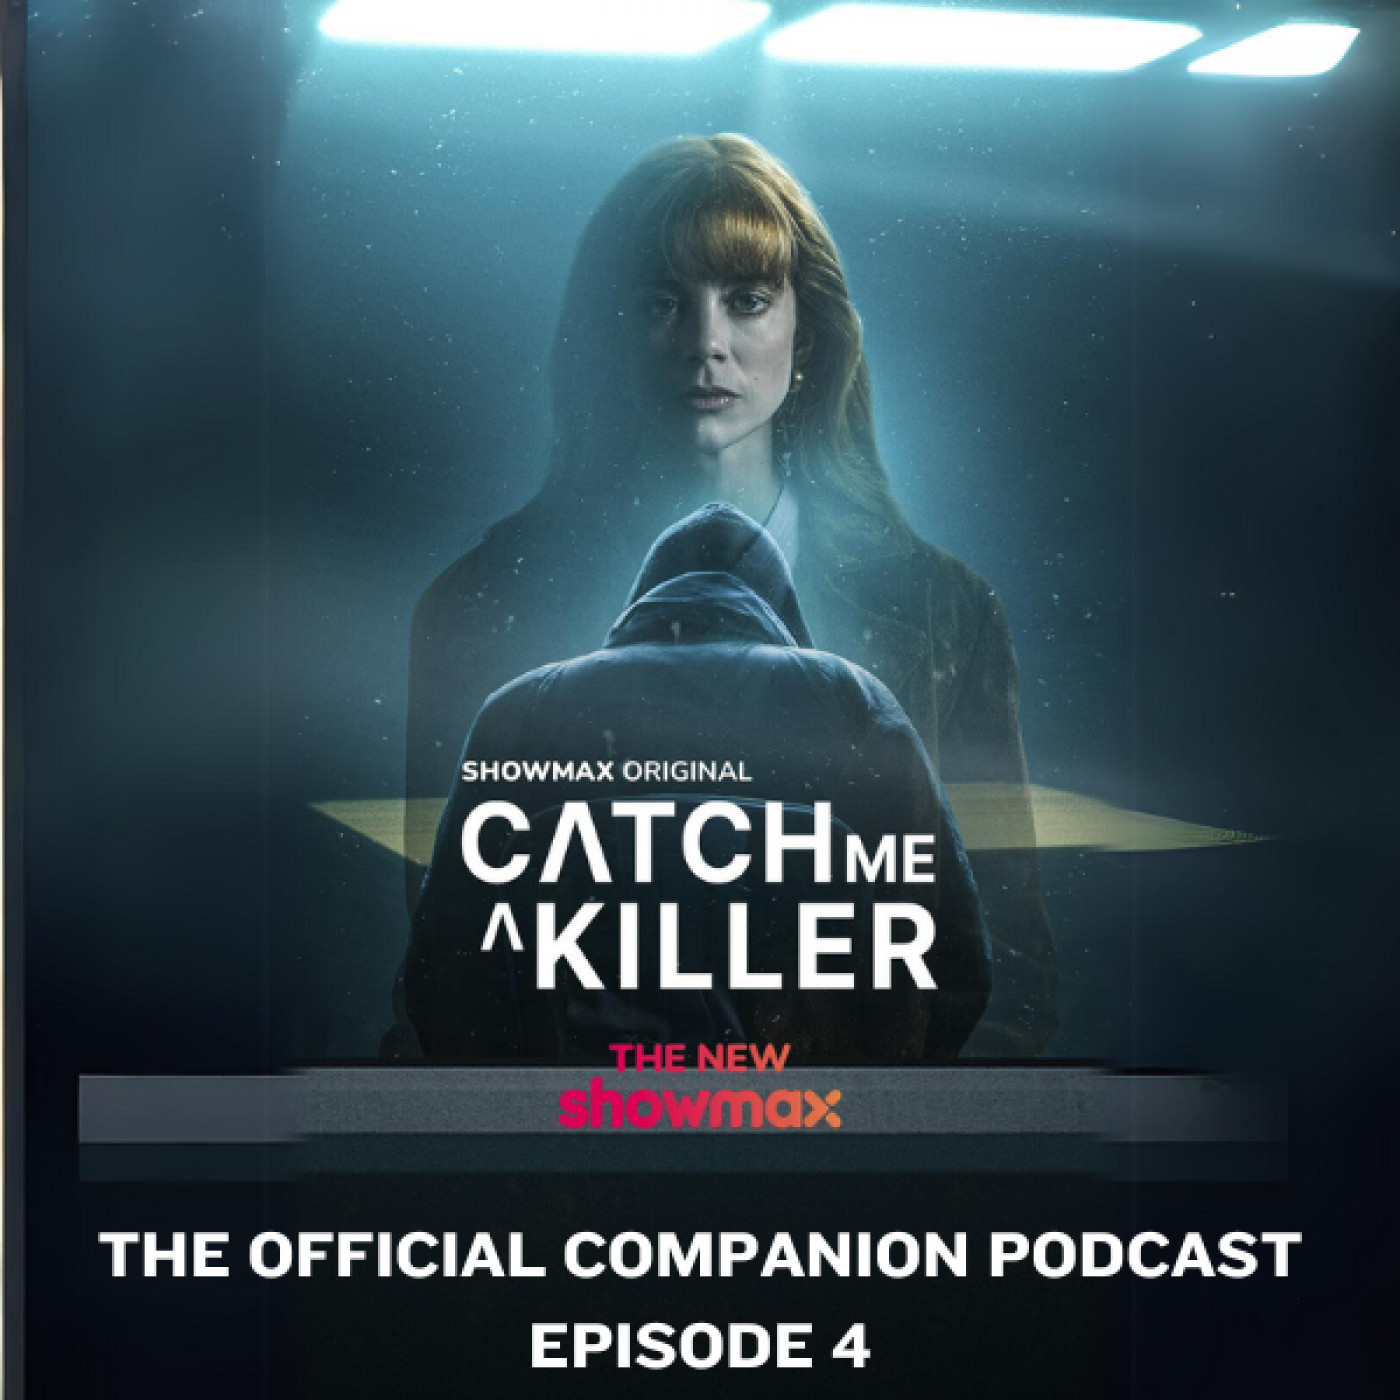 Catch Me A Killer: Official Companion Podcast Brought to you by Showmax (Episode 4)